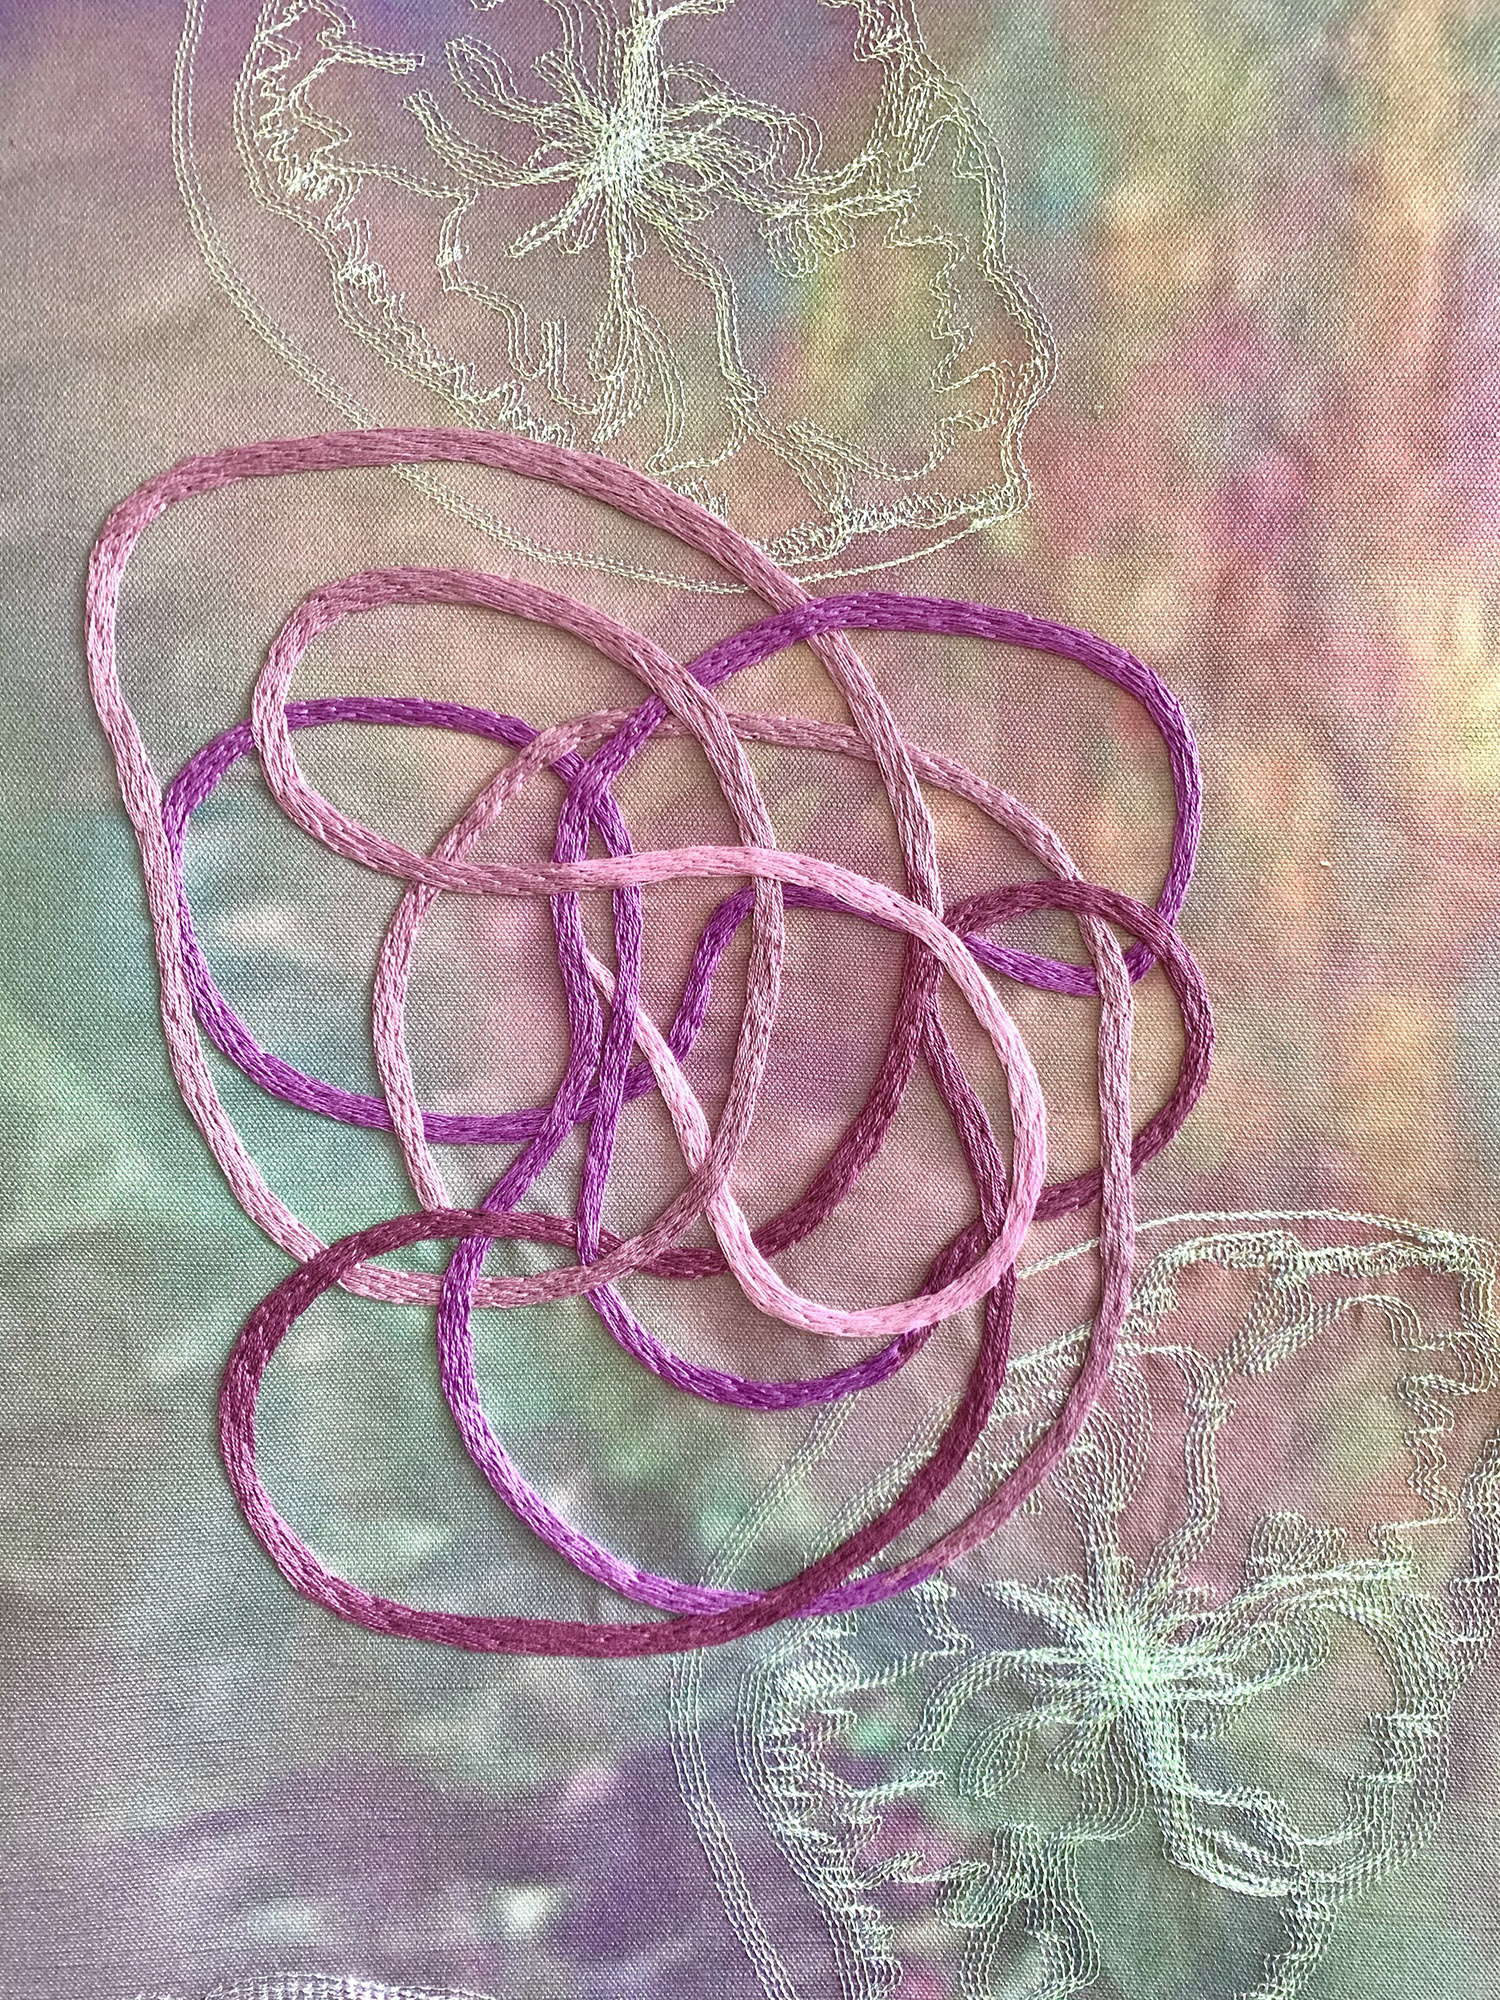 Primordium 1 (lilac), detail of hand embroidery, 2022